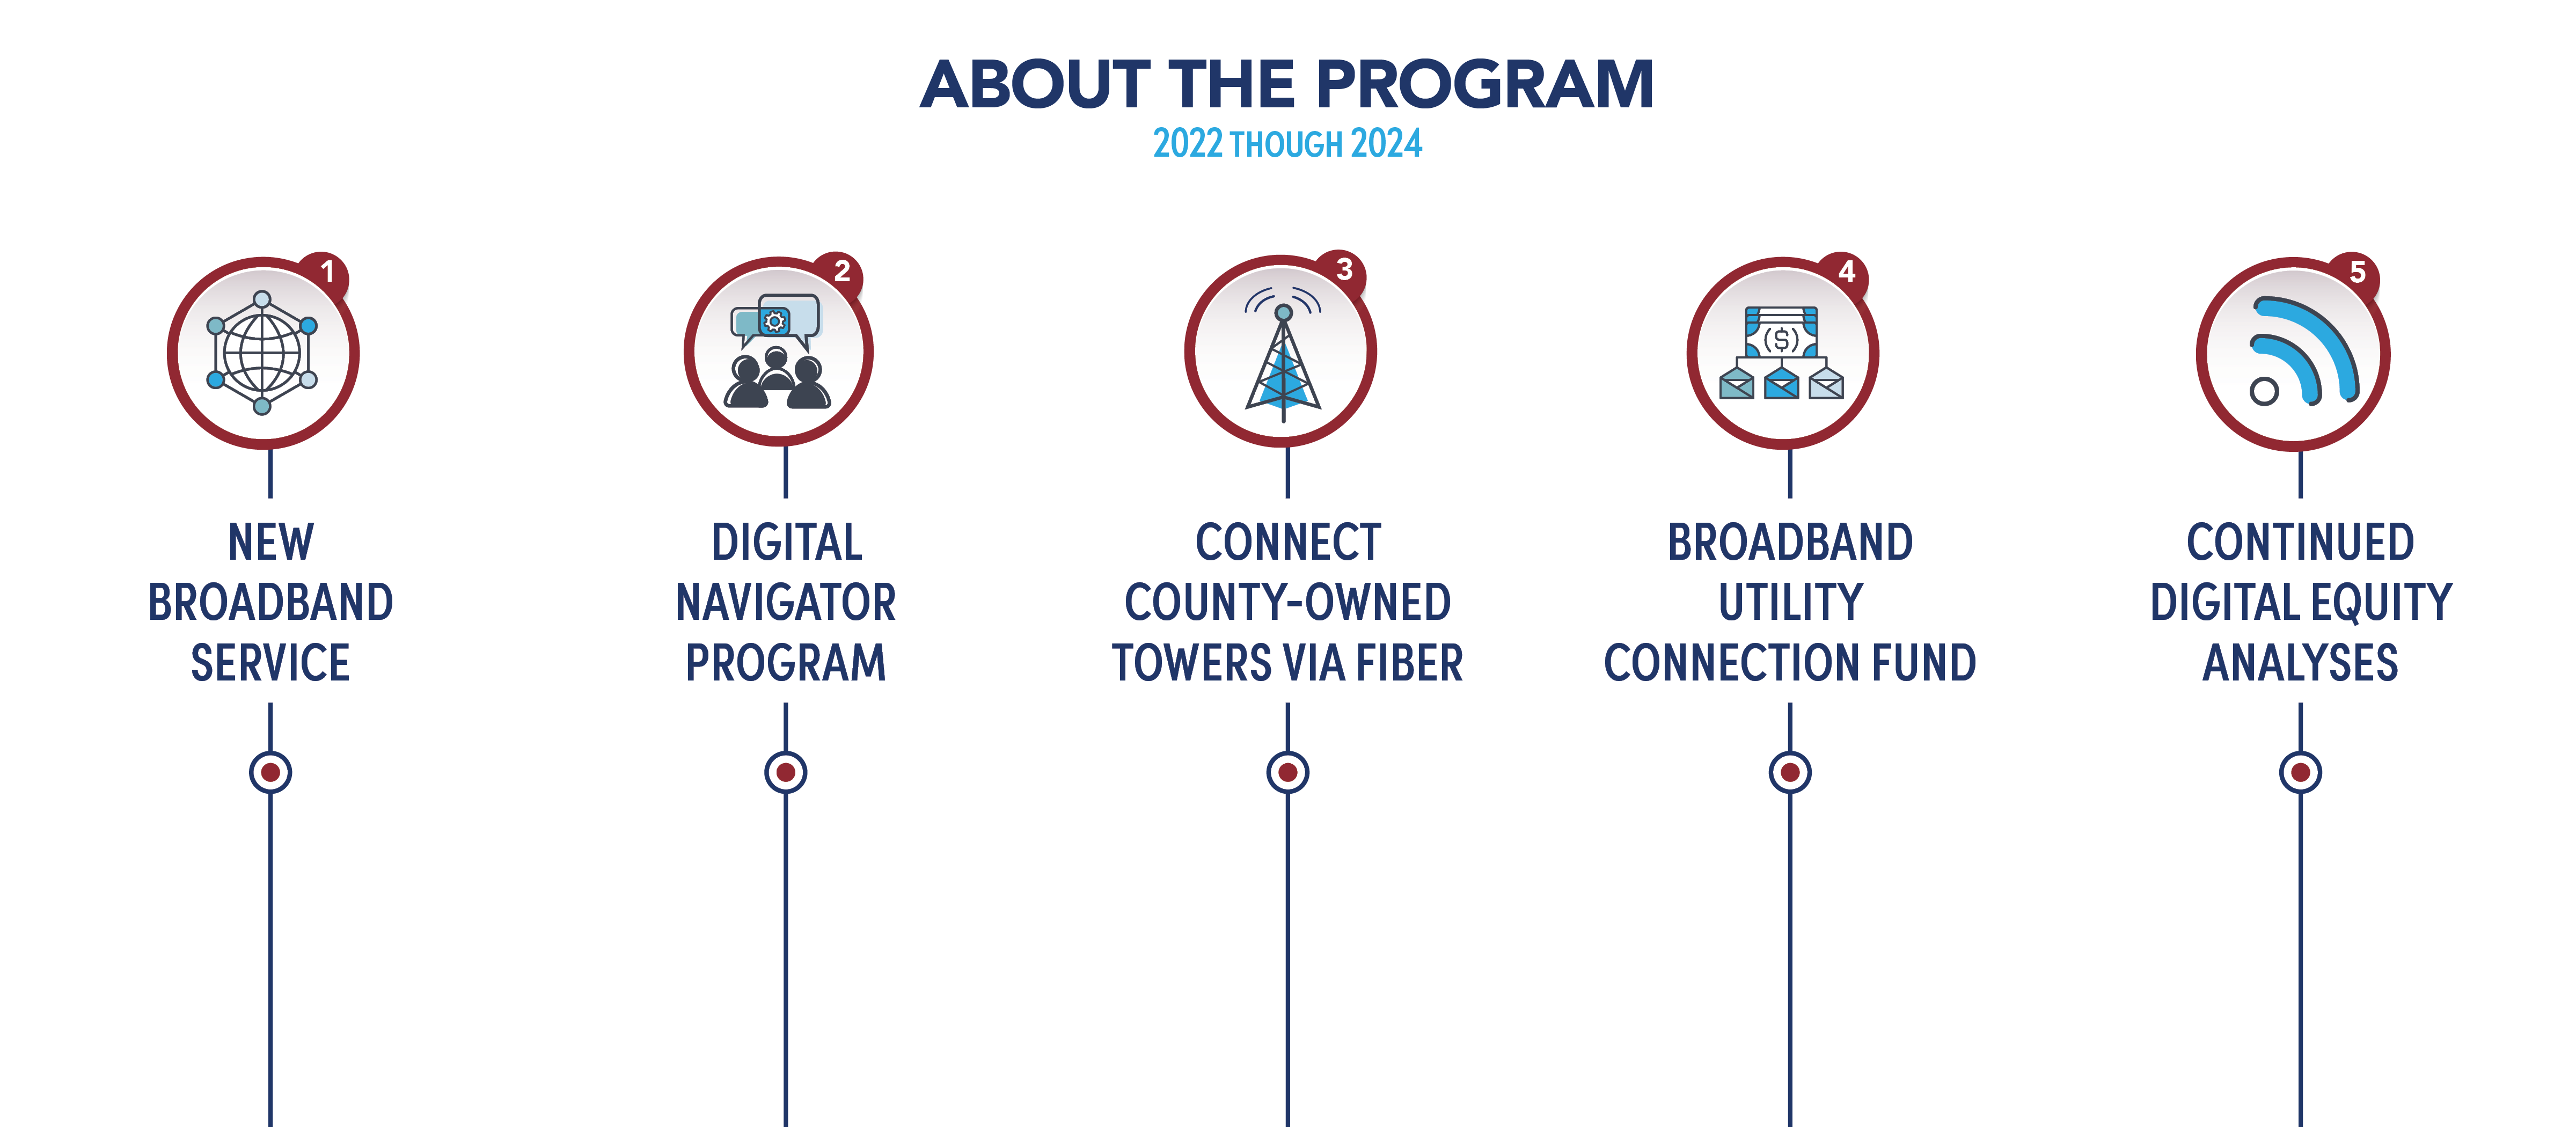 Infographic displaying the 5 main actions of the Connect Beaver County Broadband Program from 2022 through 2022 including, 1. New Broadband Service, 2. Digital Navigator Program, 3. Connect County-owned Towers via fiber, 4. Broadband Utility Connection Fund, and 5. Continued Digital Equity Analyses